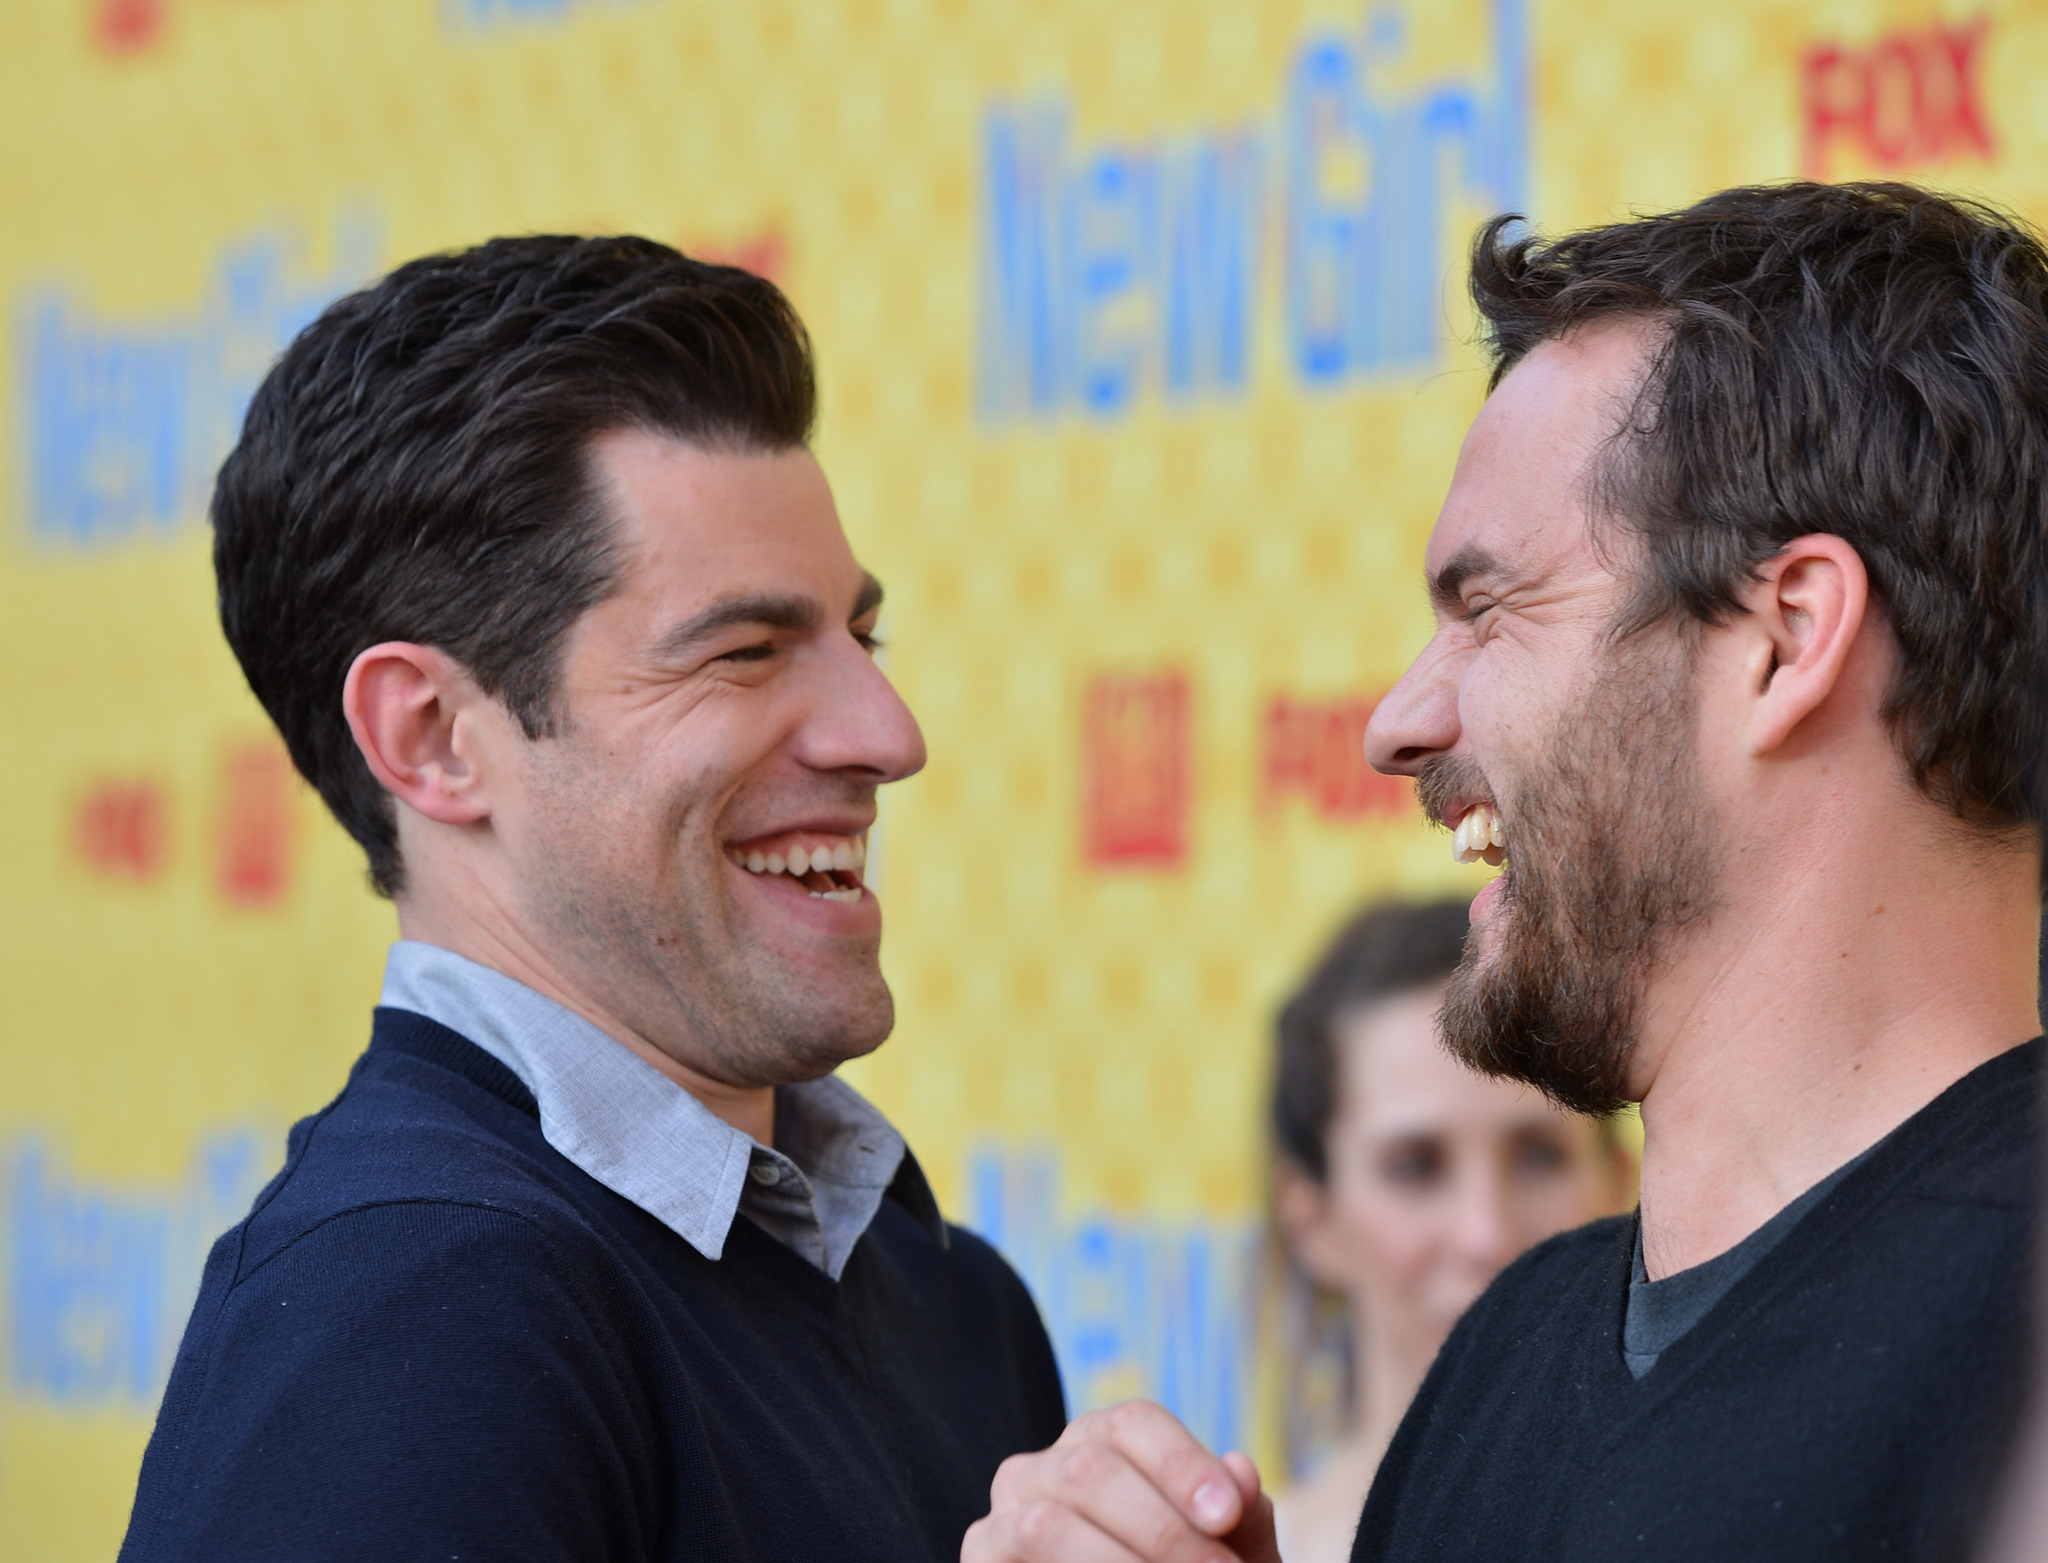 Max Greenfield and Jake Johnson at event of New Girl (2011)